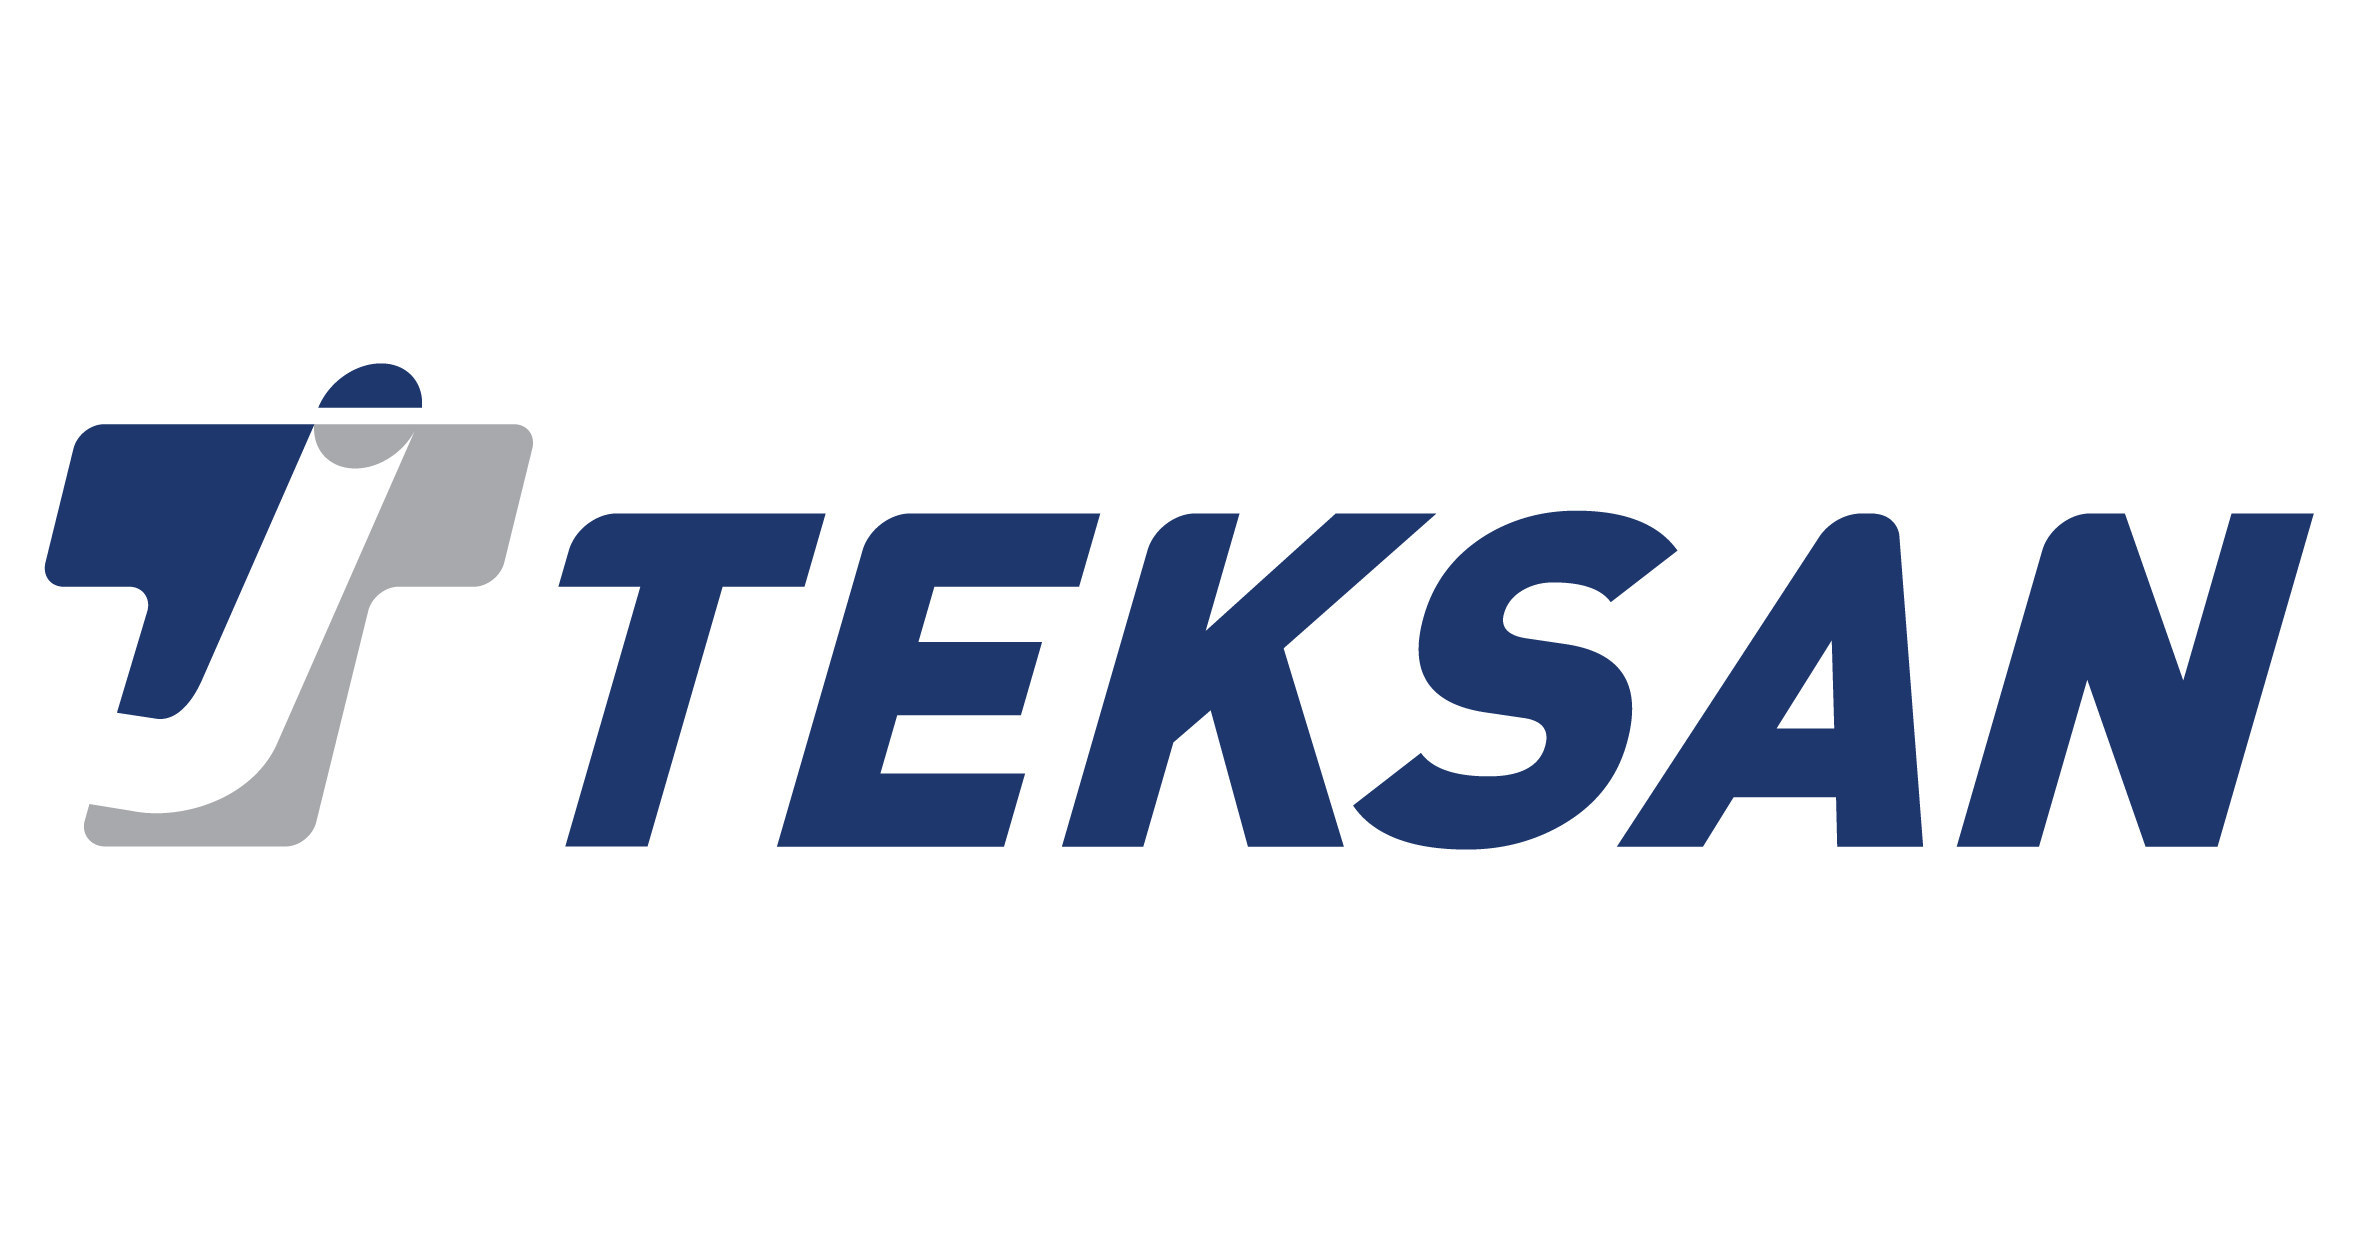 Precursor Chair Revision How Teksan Makes a Difference With Power Solutions Around the World